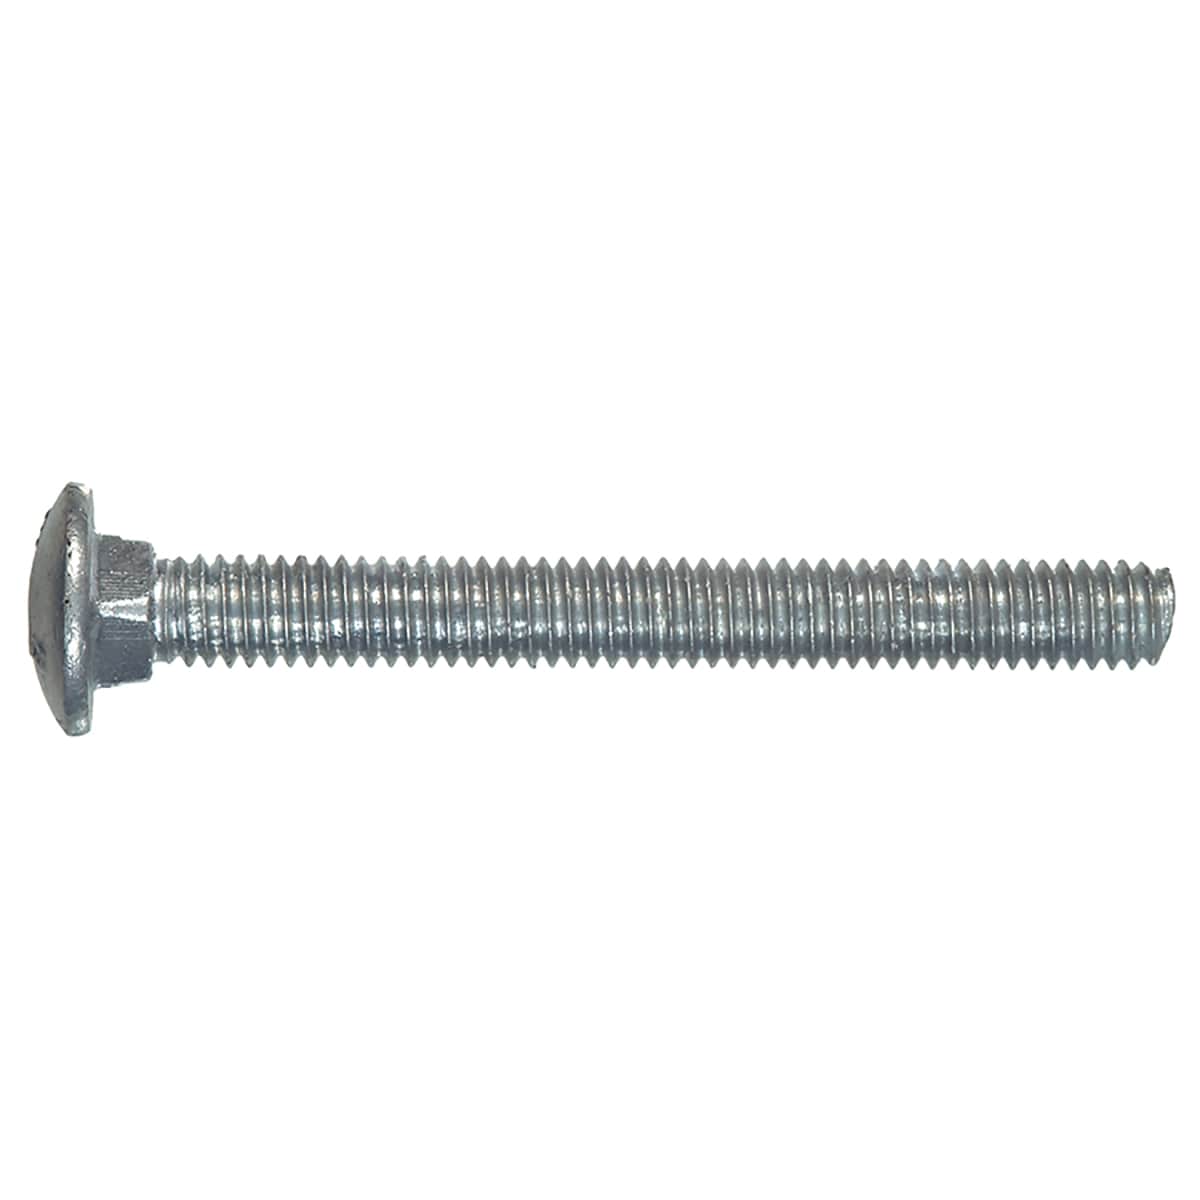 5/16-18x2-1/2 Stainless  Carriage Bolts round Head Screws 5/16 x 2-1/2 100 